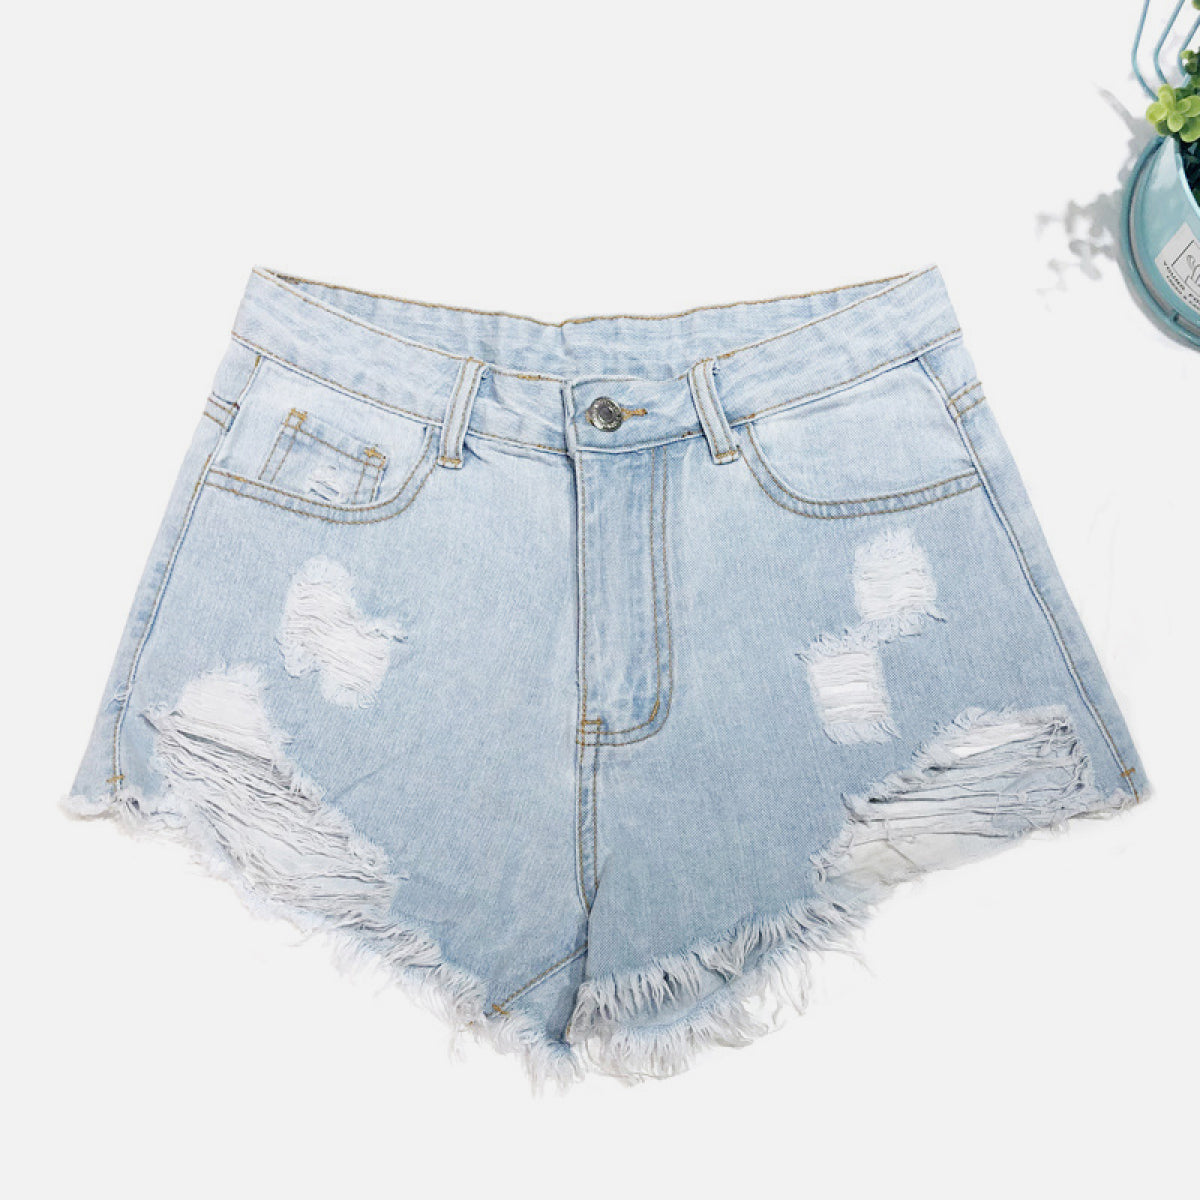 Ripped Hems Distressed Denim Shorts - LOLA LUXE